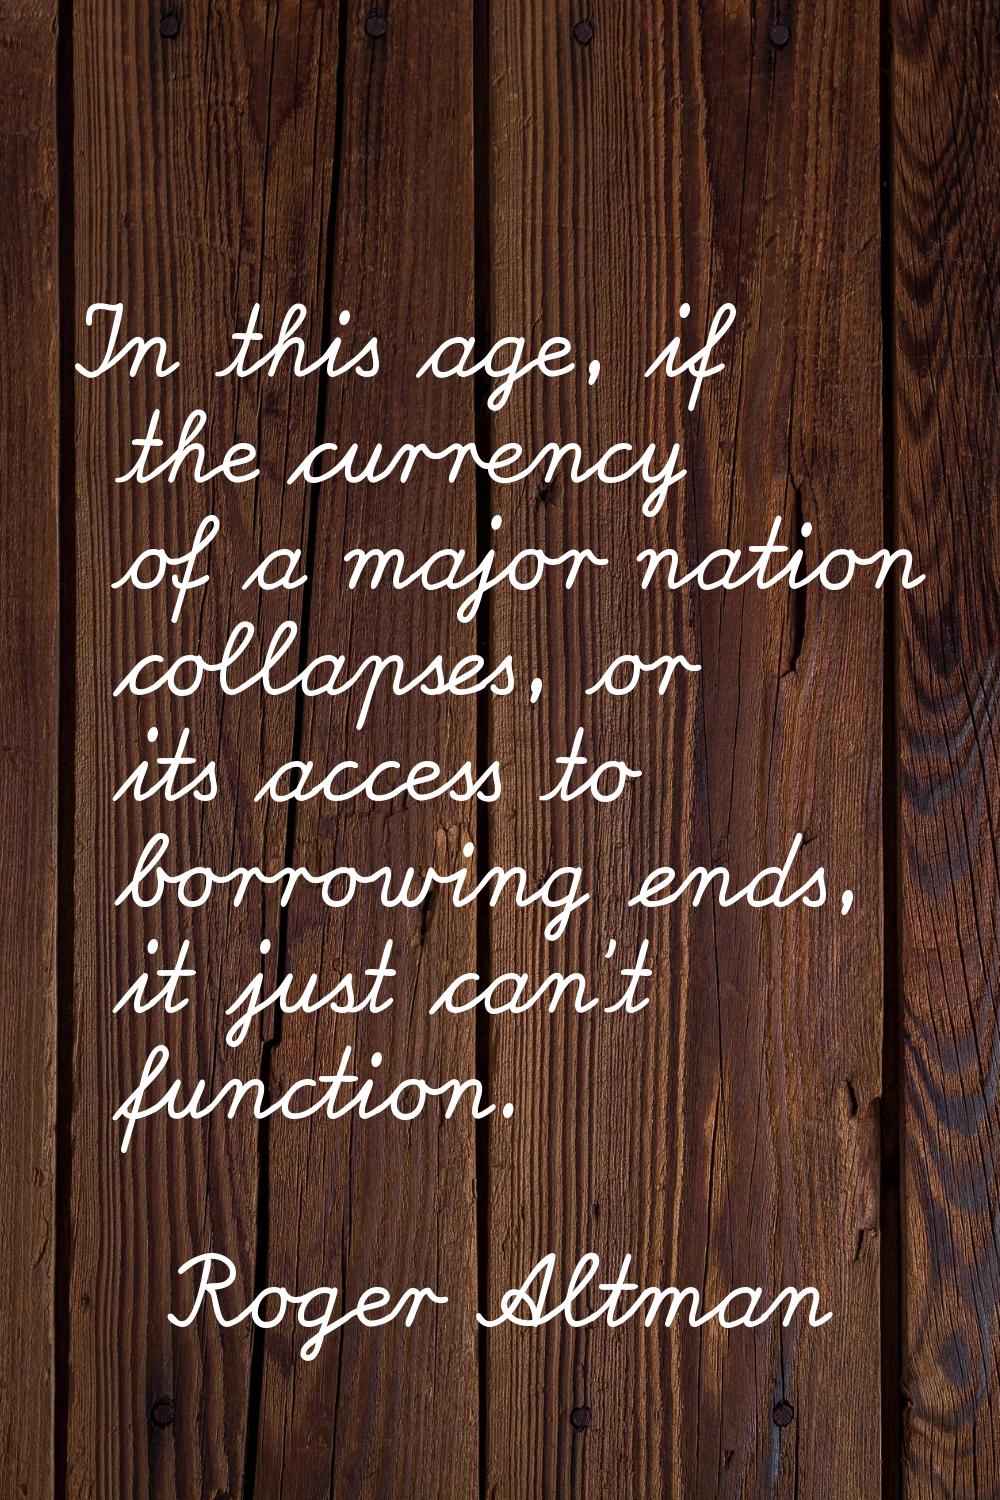 In this age, if the currency of a major nation collapses, or its access to borrowing ends, it just 